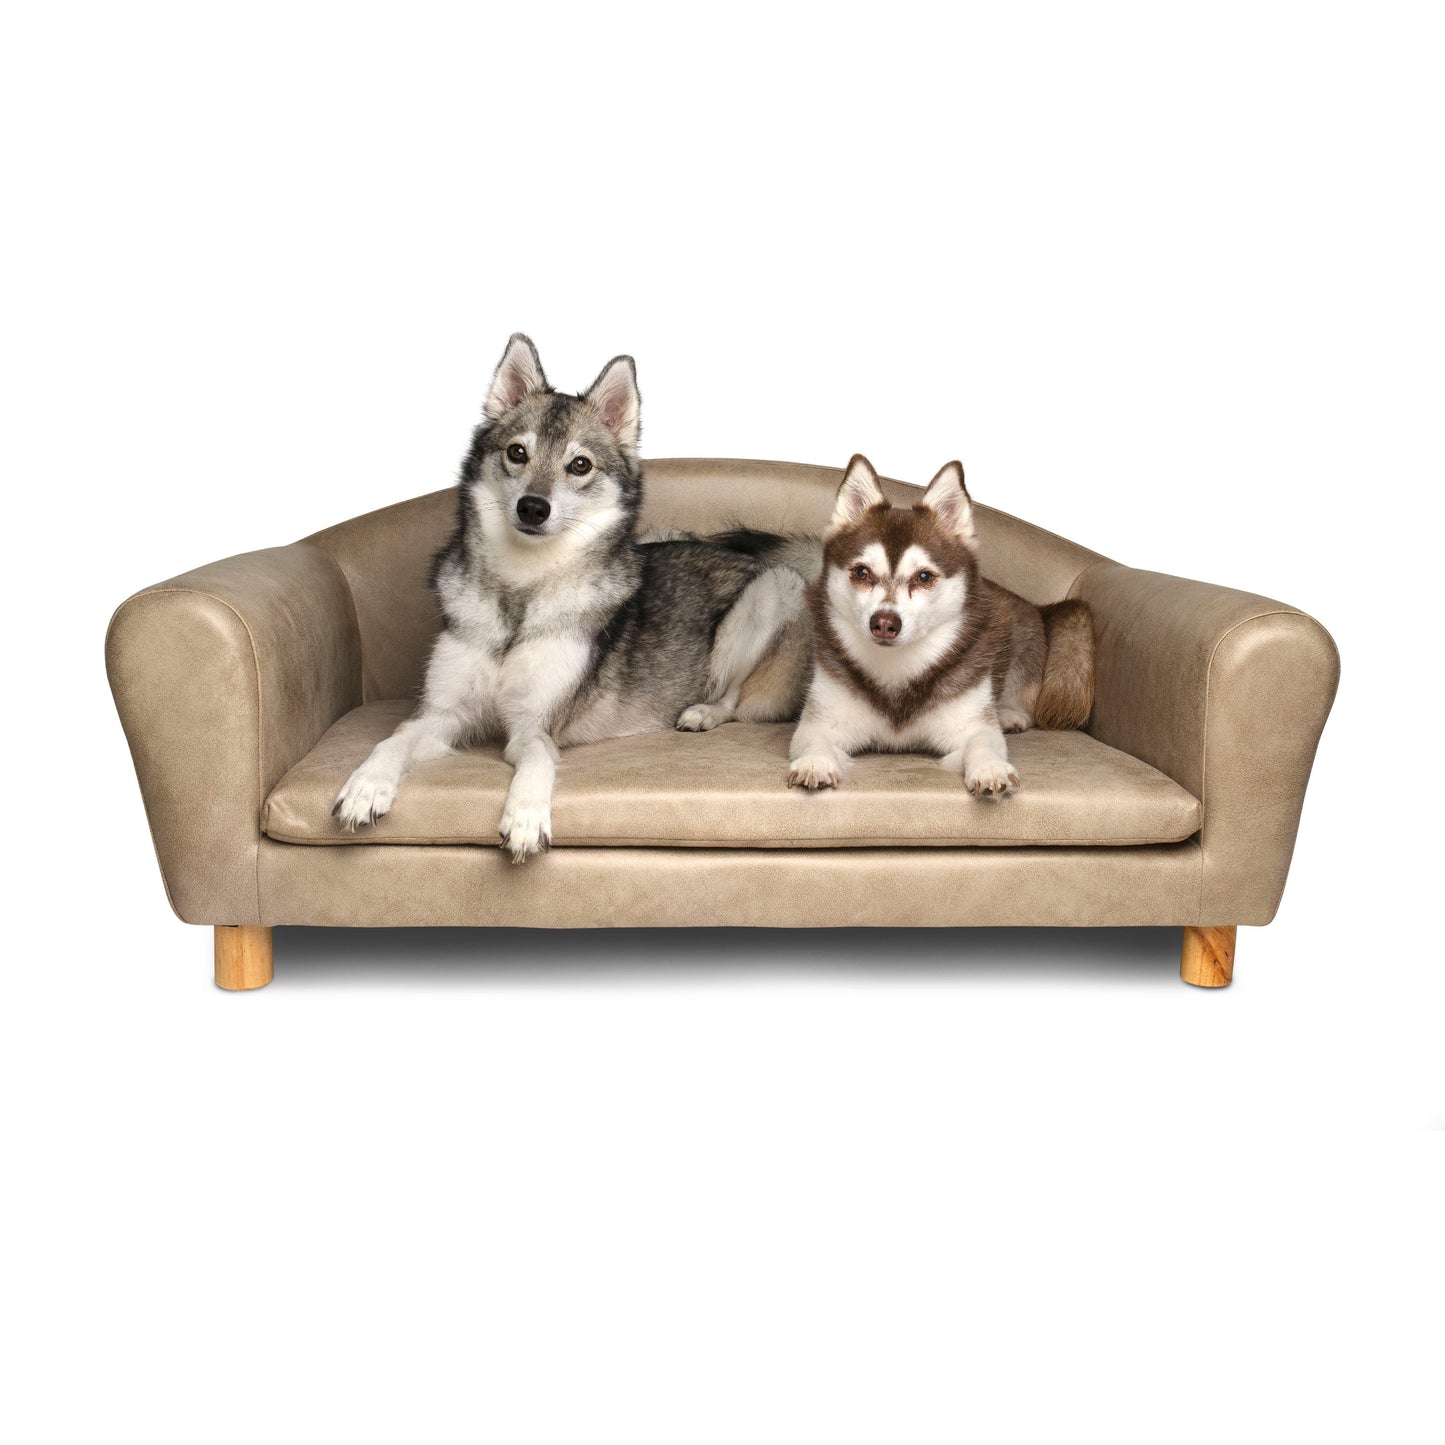 Midlee Duke Pet Couch Bed- Large Dog Sofa Furniture